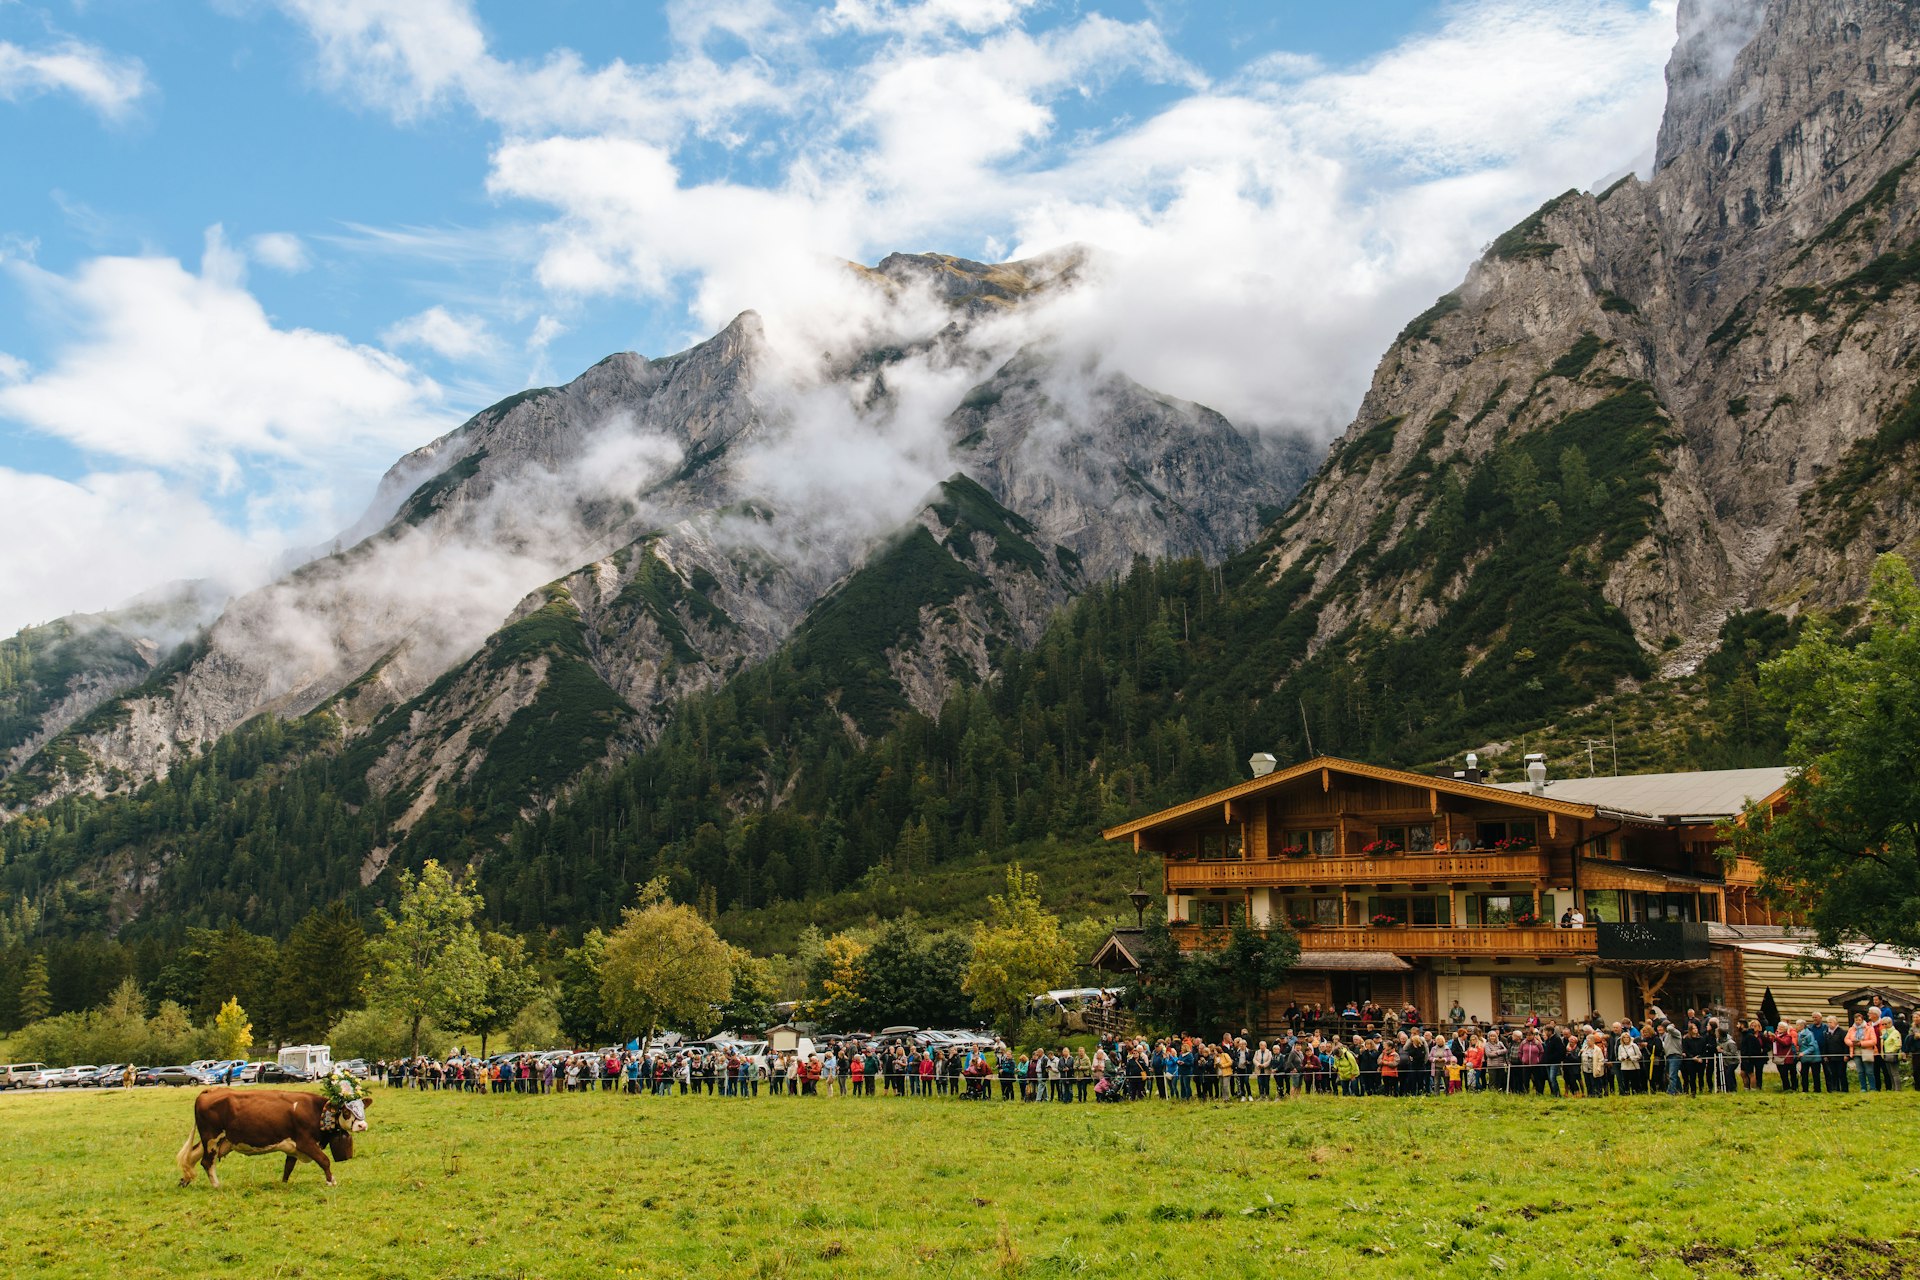 Cattle herds feed on alpine pastures as onlookers watch in a large crowd